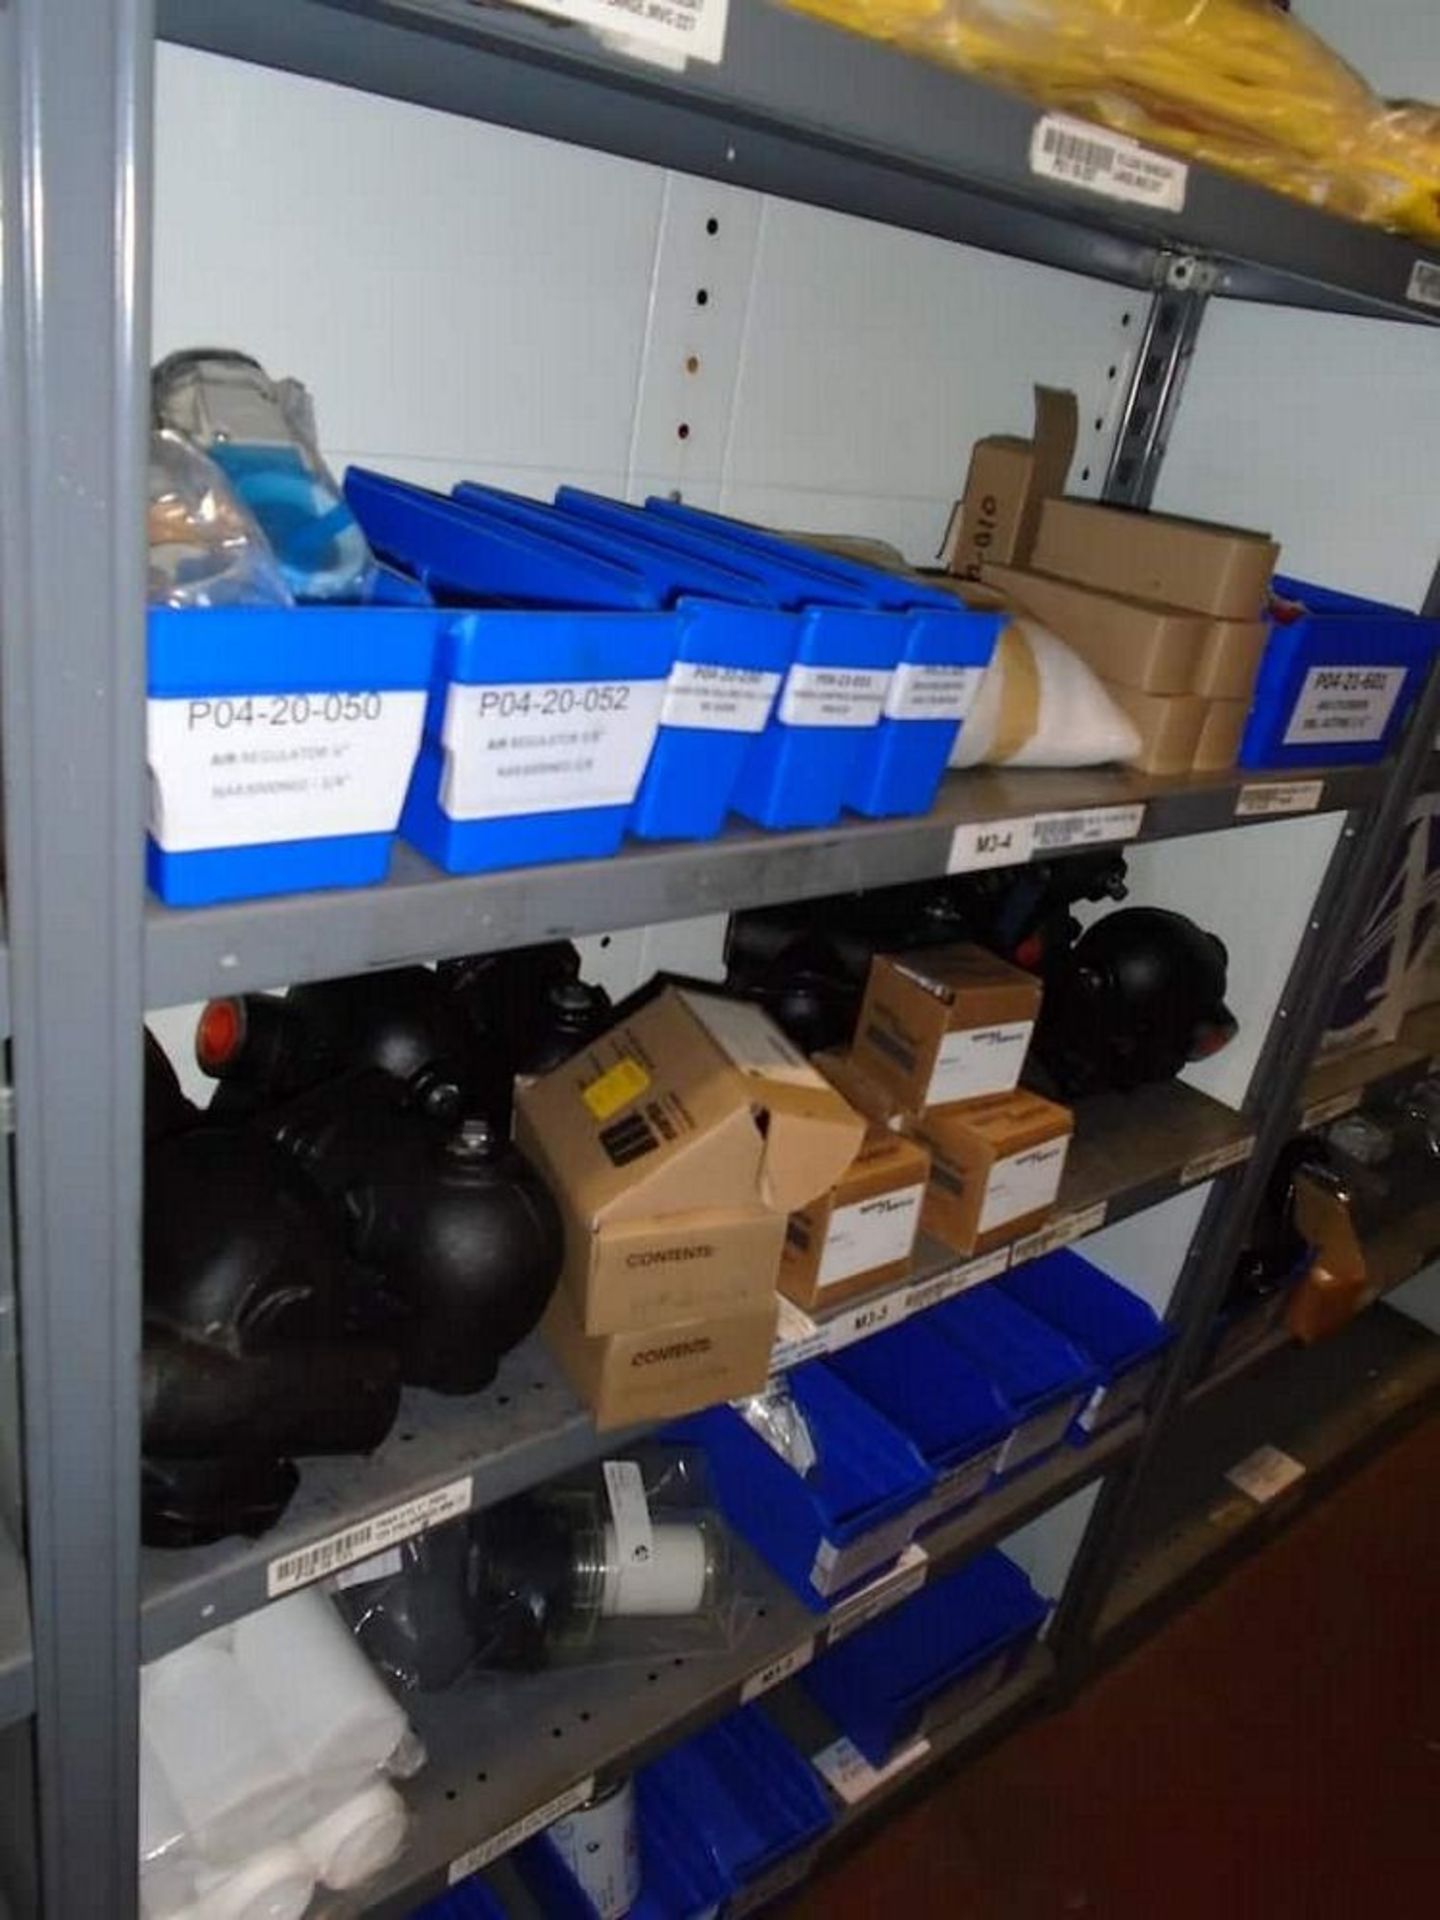 Contents of Shelves ( Assorted Rain Jackets, filters, Steam Traps) - Image 2 of 3